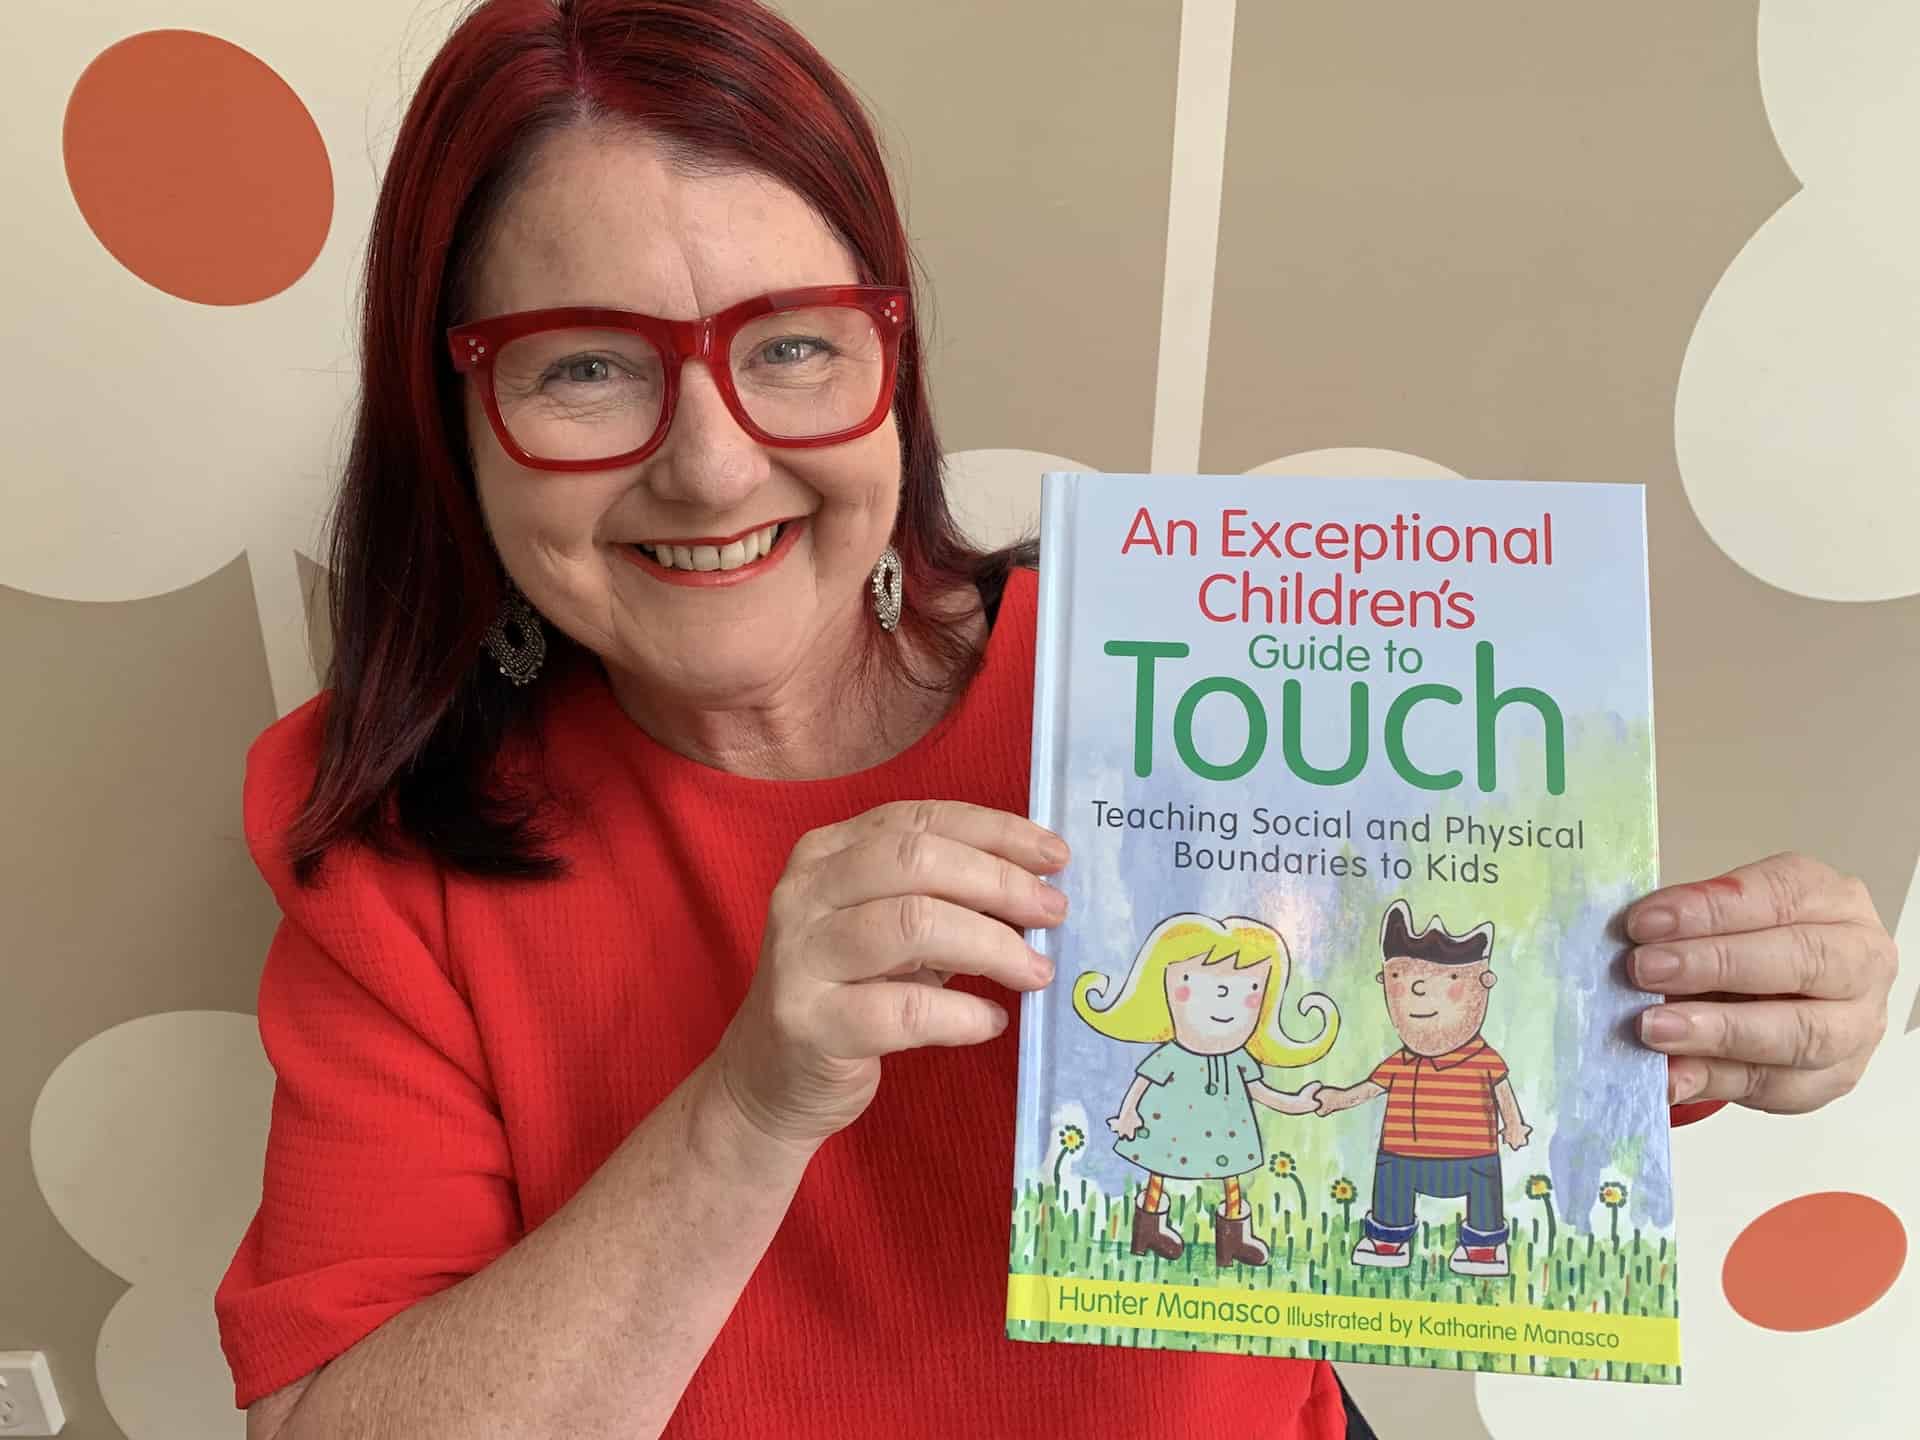 An Exceptional Children's Guide to Touch - Book review by Rowena Thomas | 'Amazing Me'